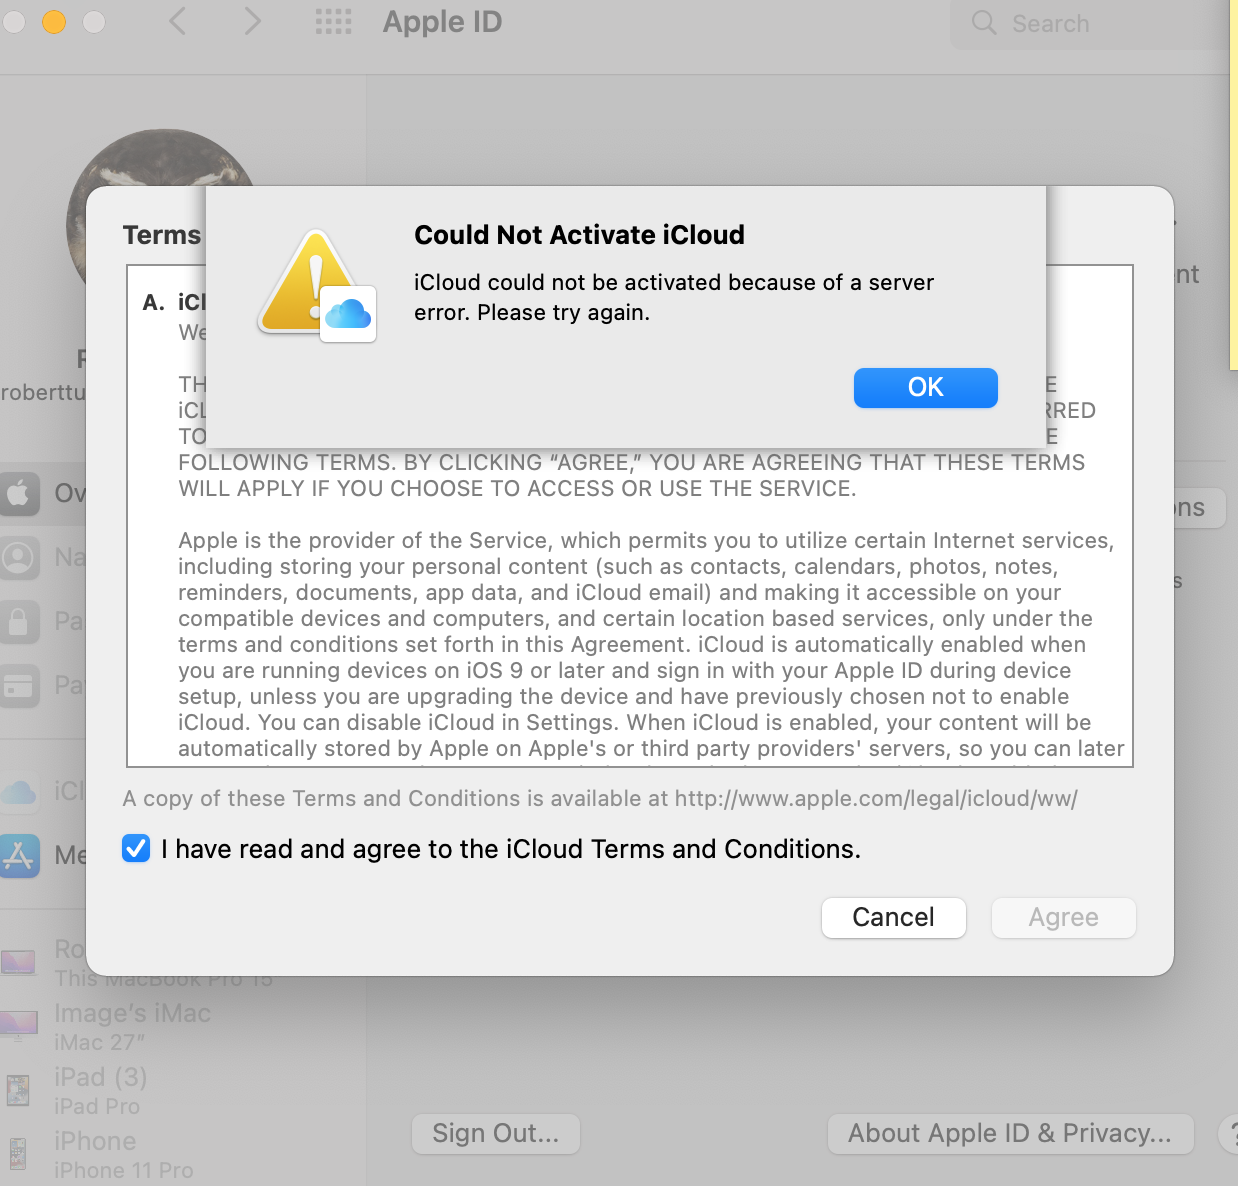 New iCloud Terms and Conditions Apple Community